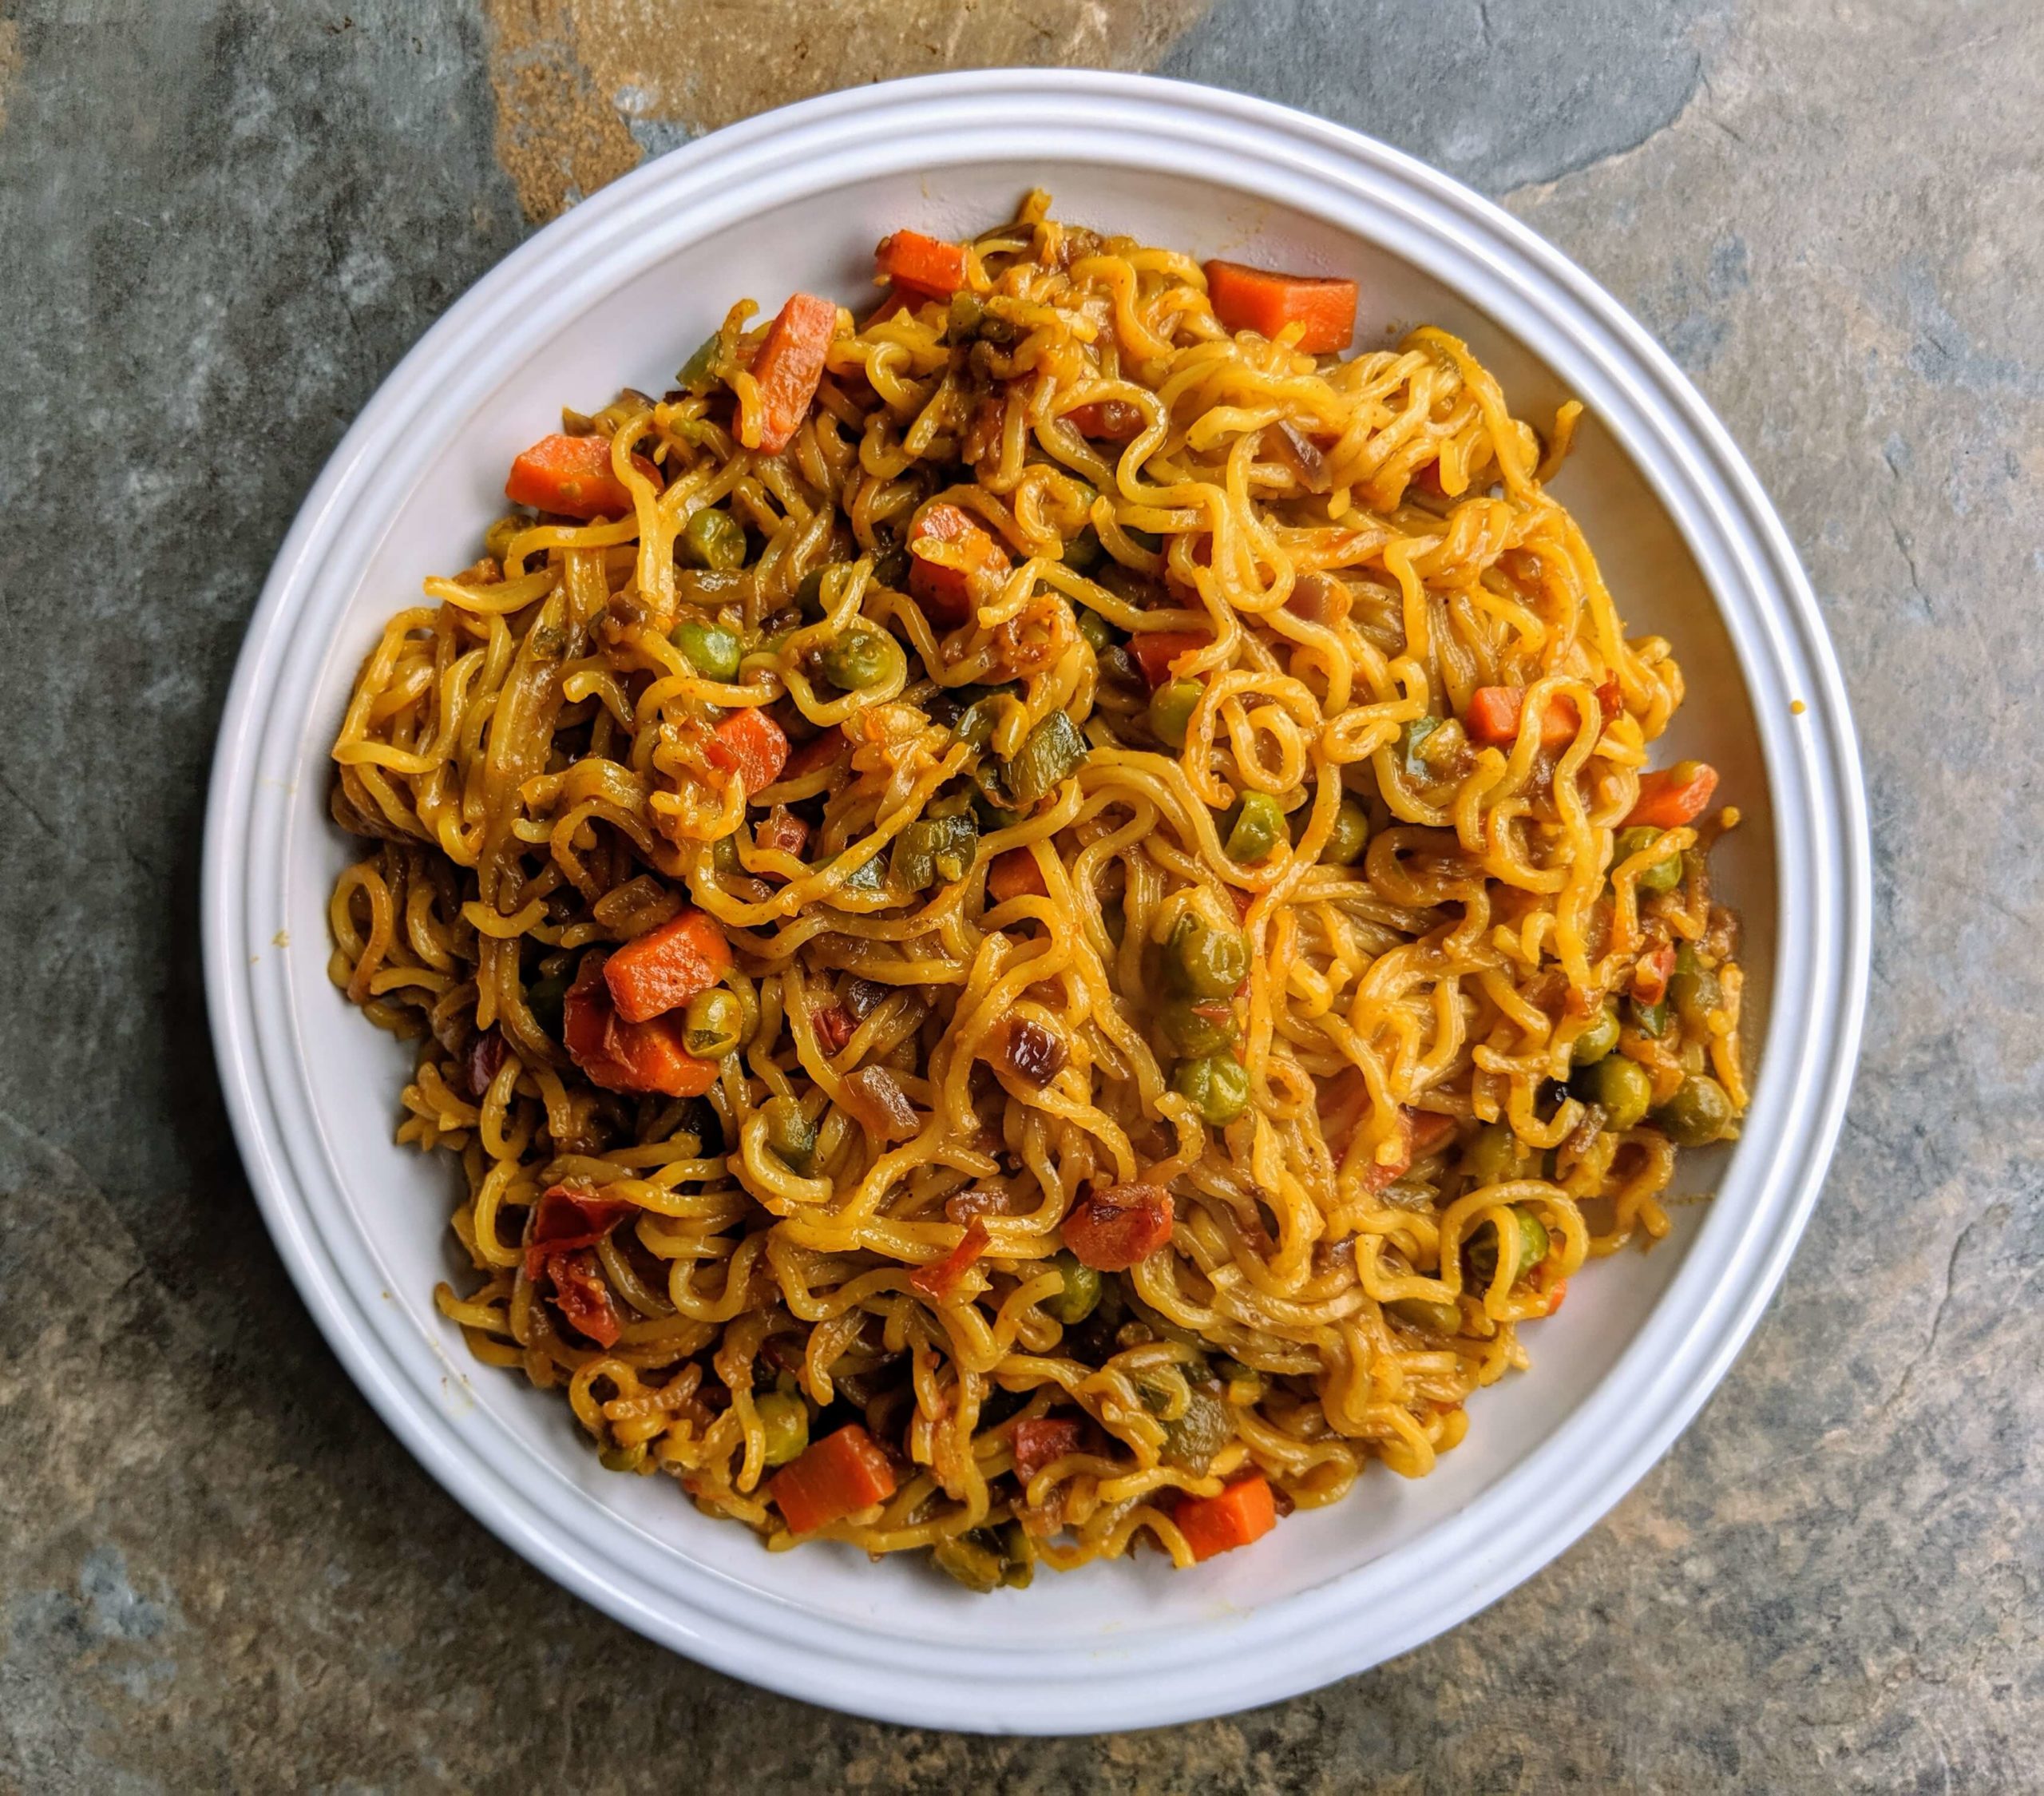 Vegetable Masala Maggi is a healthy twist on maggi noodles made by tossing the noodles along with mixed vegetables and spices.